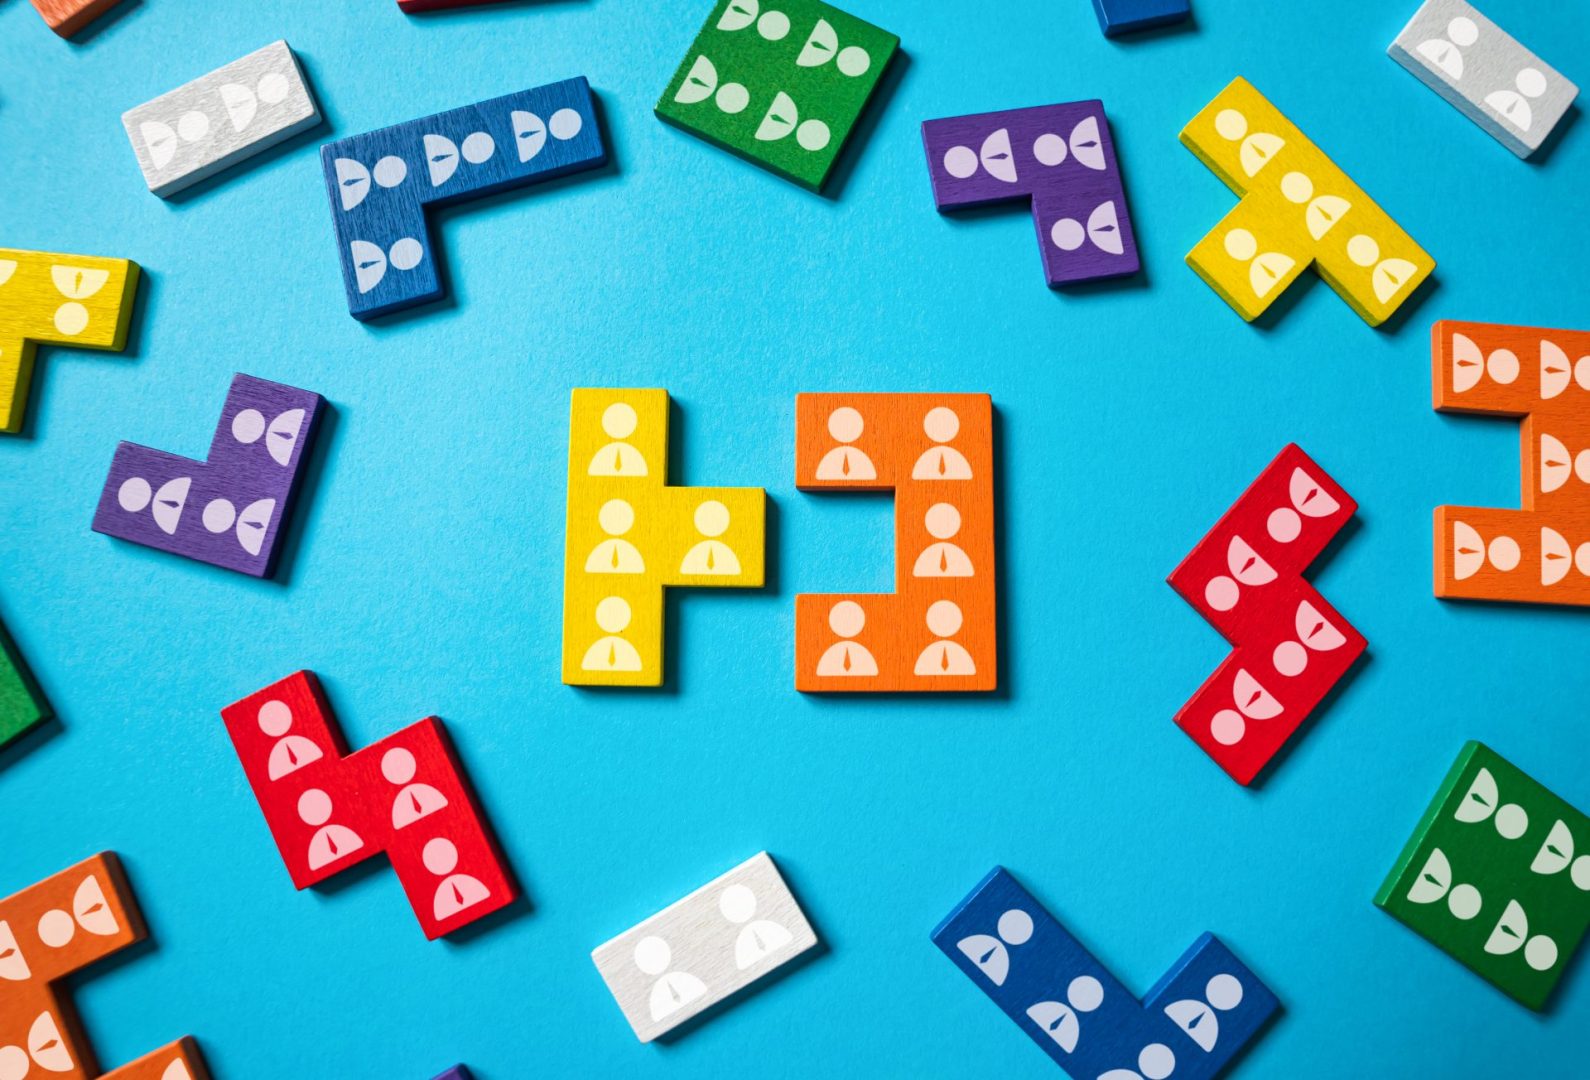 Colourful puzzle pieces decorated with personnel icons scattered across a blue surface.